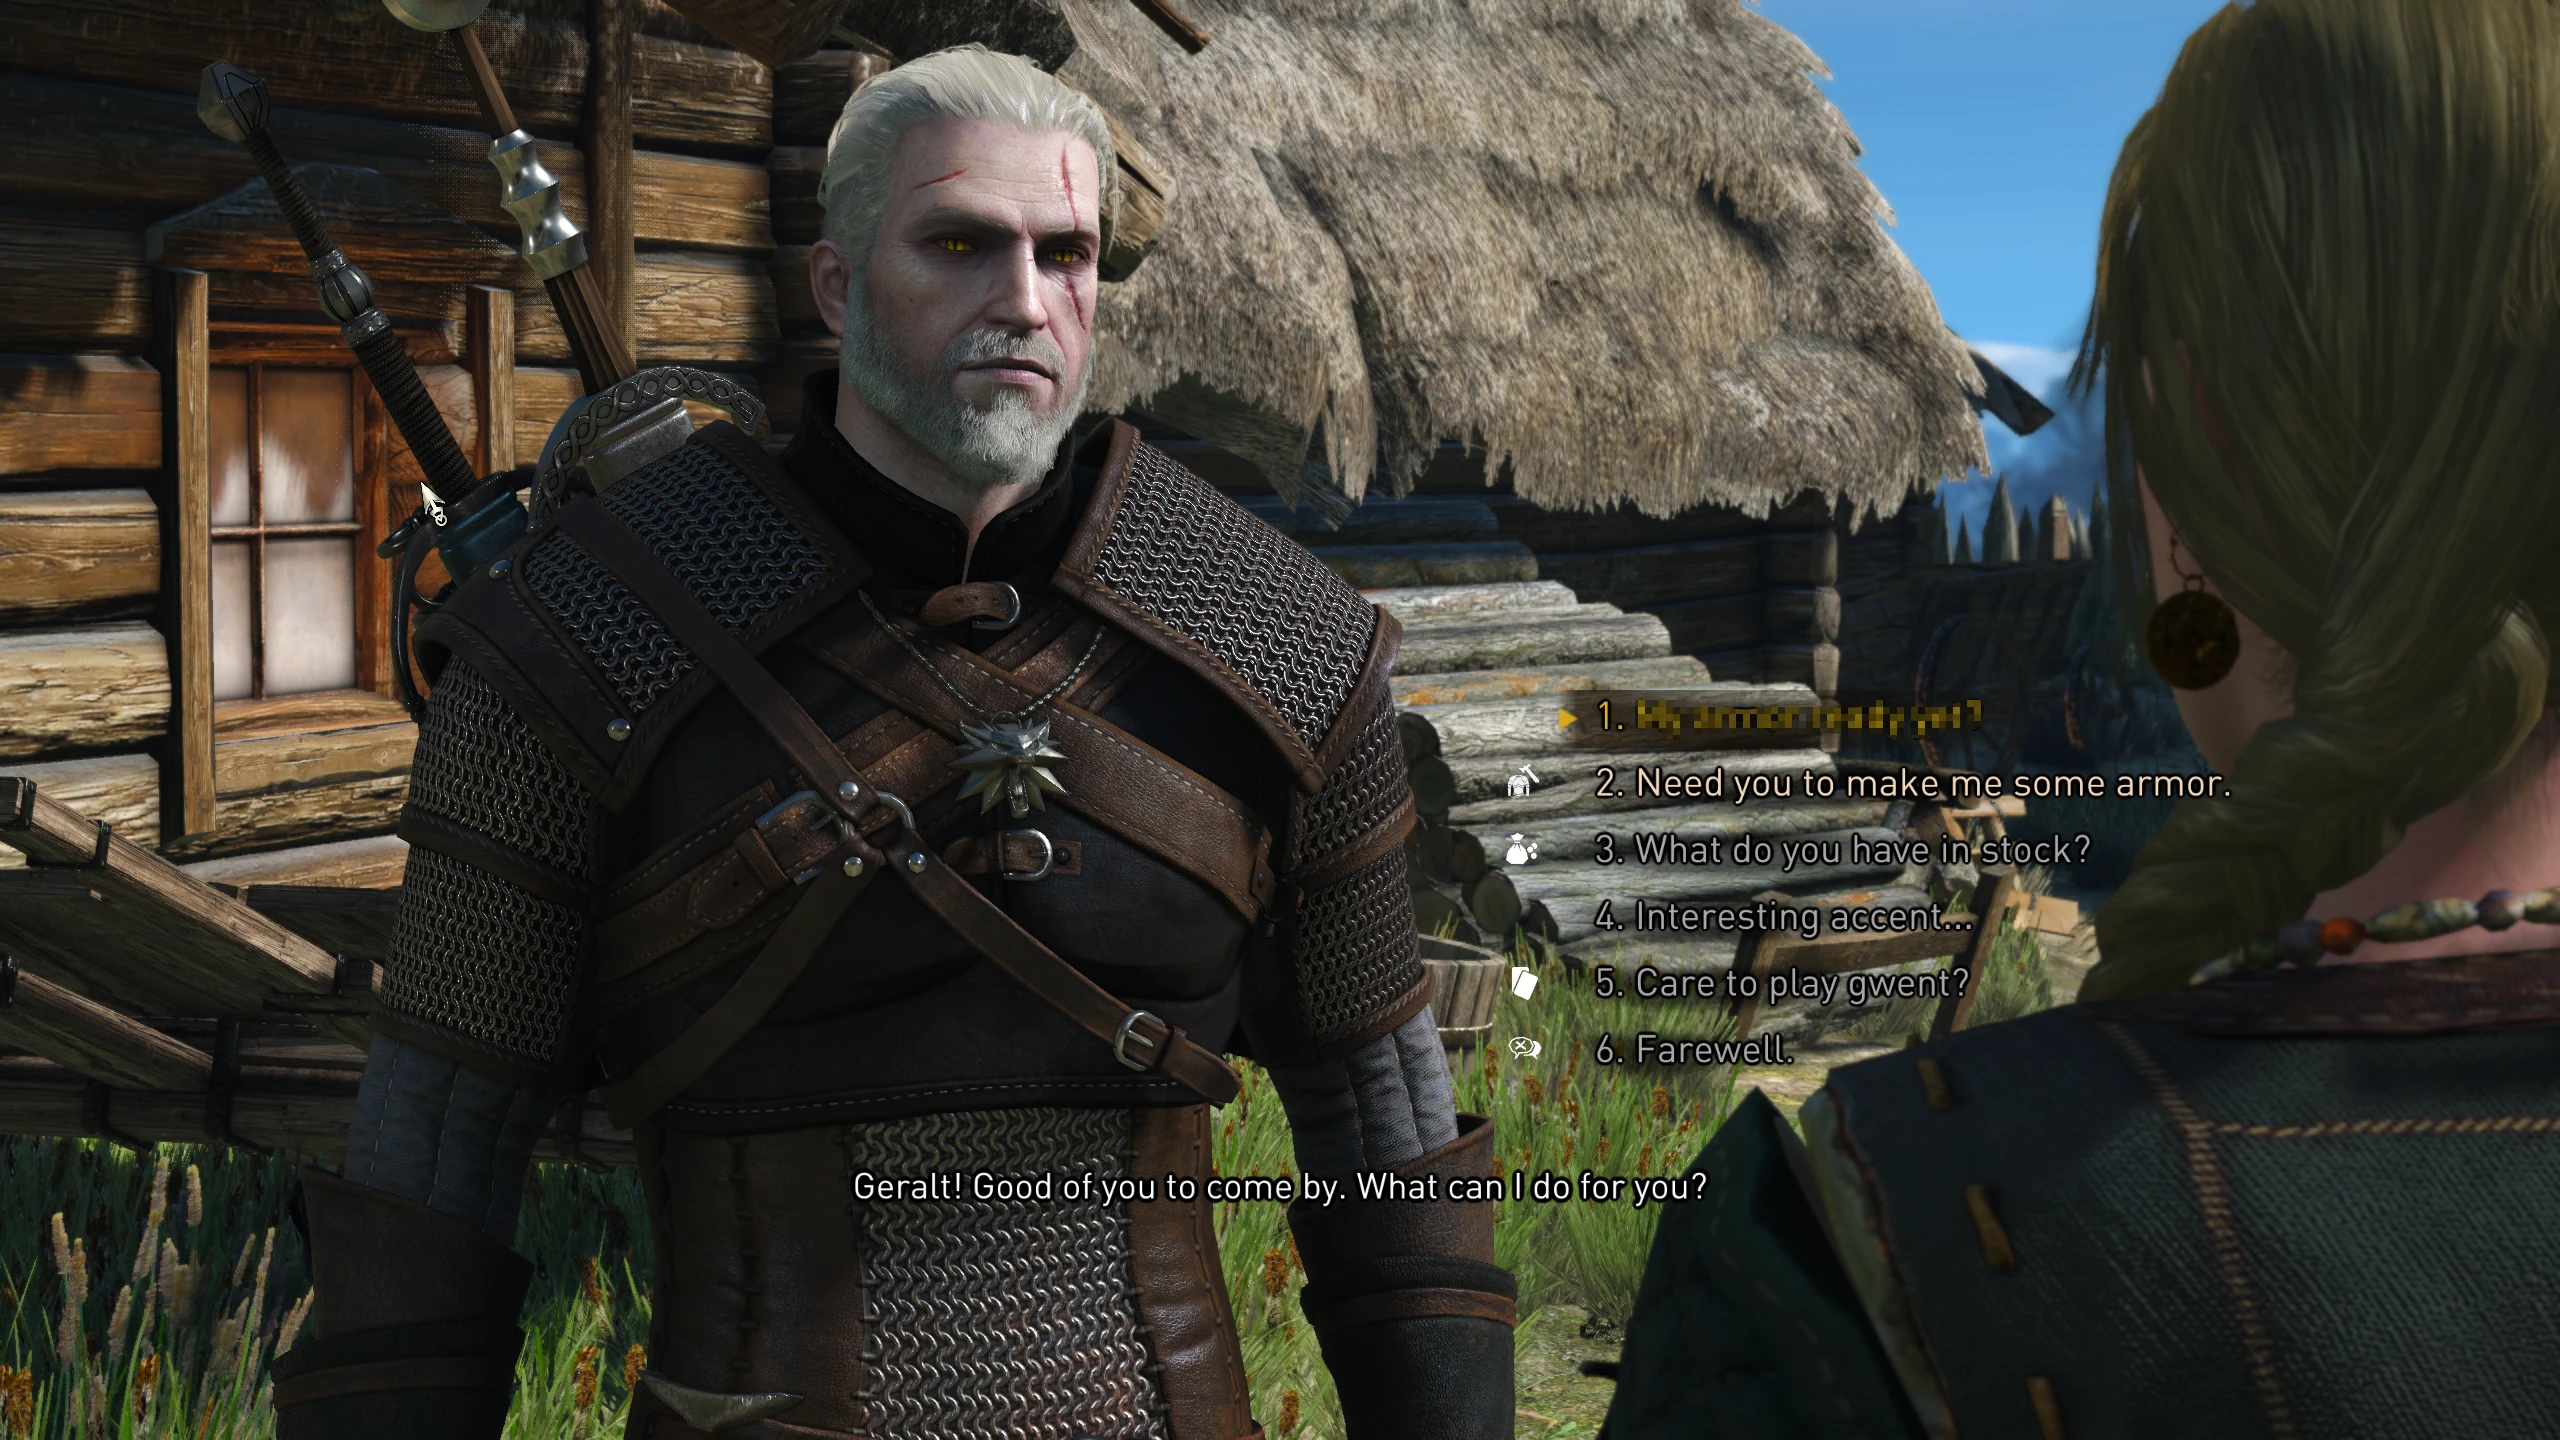 The witcher 3 community patch фото 82